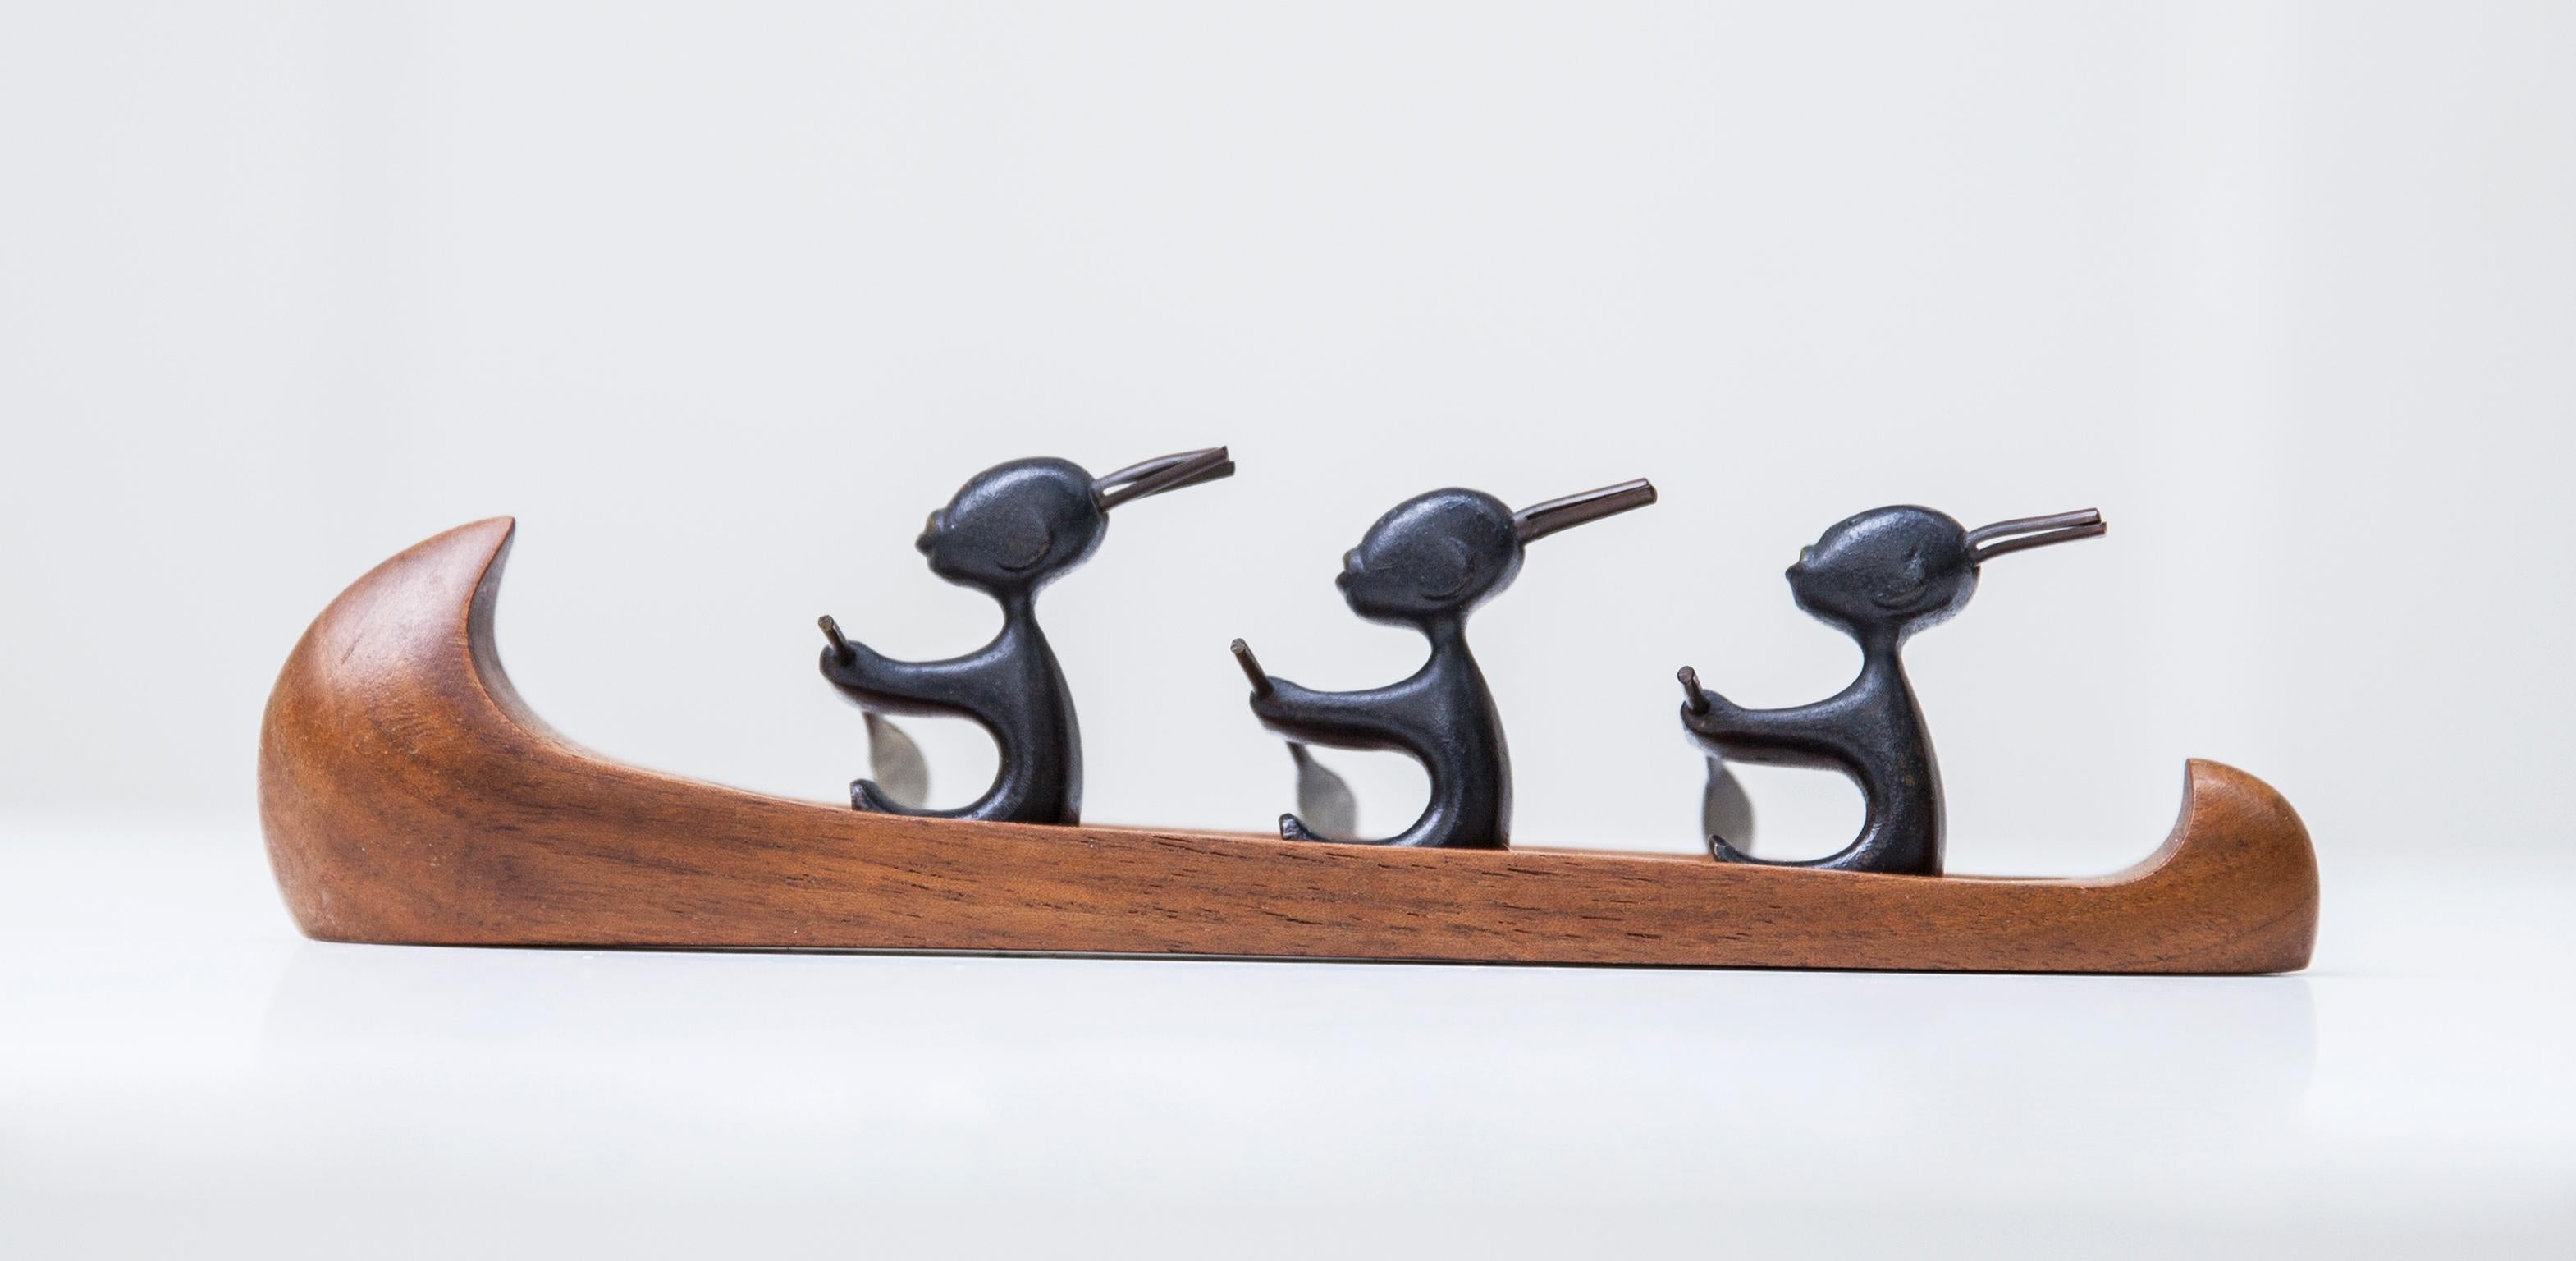 Out of the African series we present a rare rowboat with three seating African children. The boat is made in teak and bronze and it is marked and in a perfect condition. Lit. Hagenauer – Wiener Moderne und neue Sachlichkeit“, Olga Kronsteiner, comp.